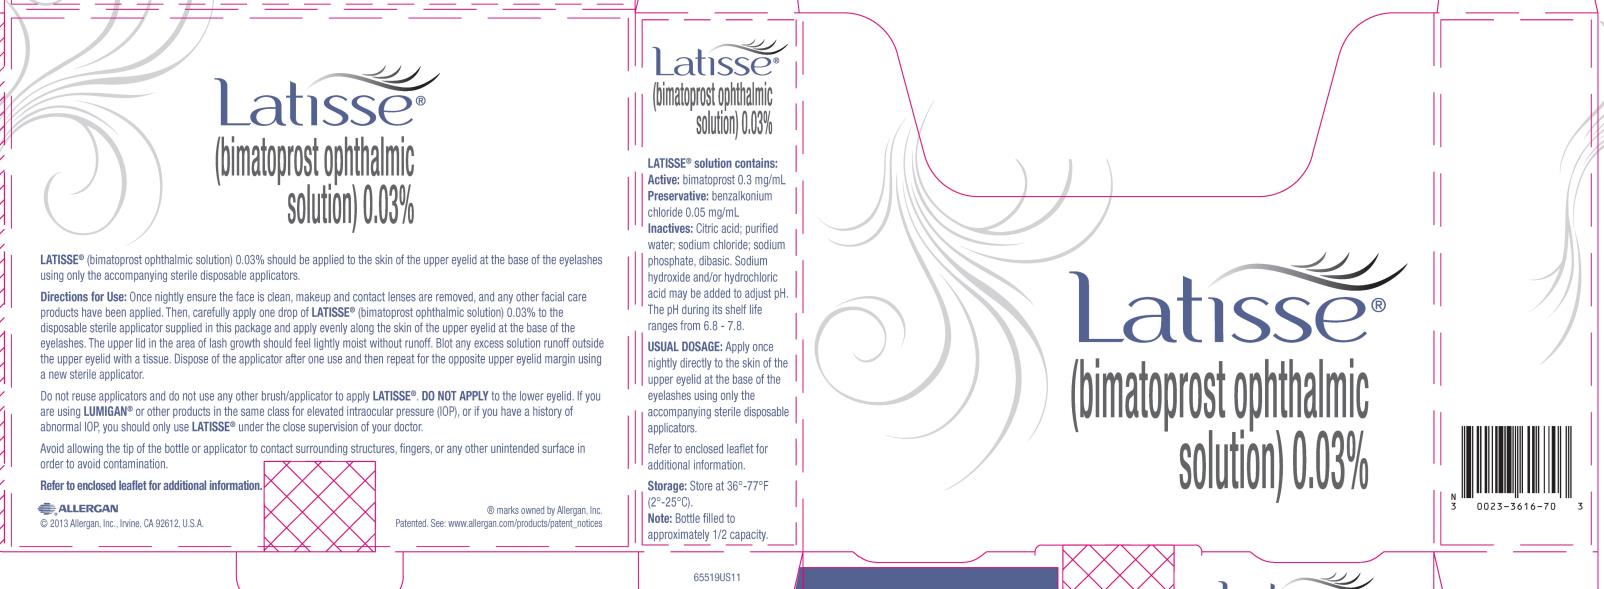 NDC 0023-3616-70 

Latisse ® 

(bimatoprost ophthalmic
solution) 0.03%
Rx only  
STERILE R
ALLERGAN
Contents: 
One 3 mL bottle of sterile solution 
70 disposable applicators
